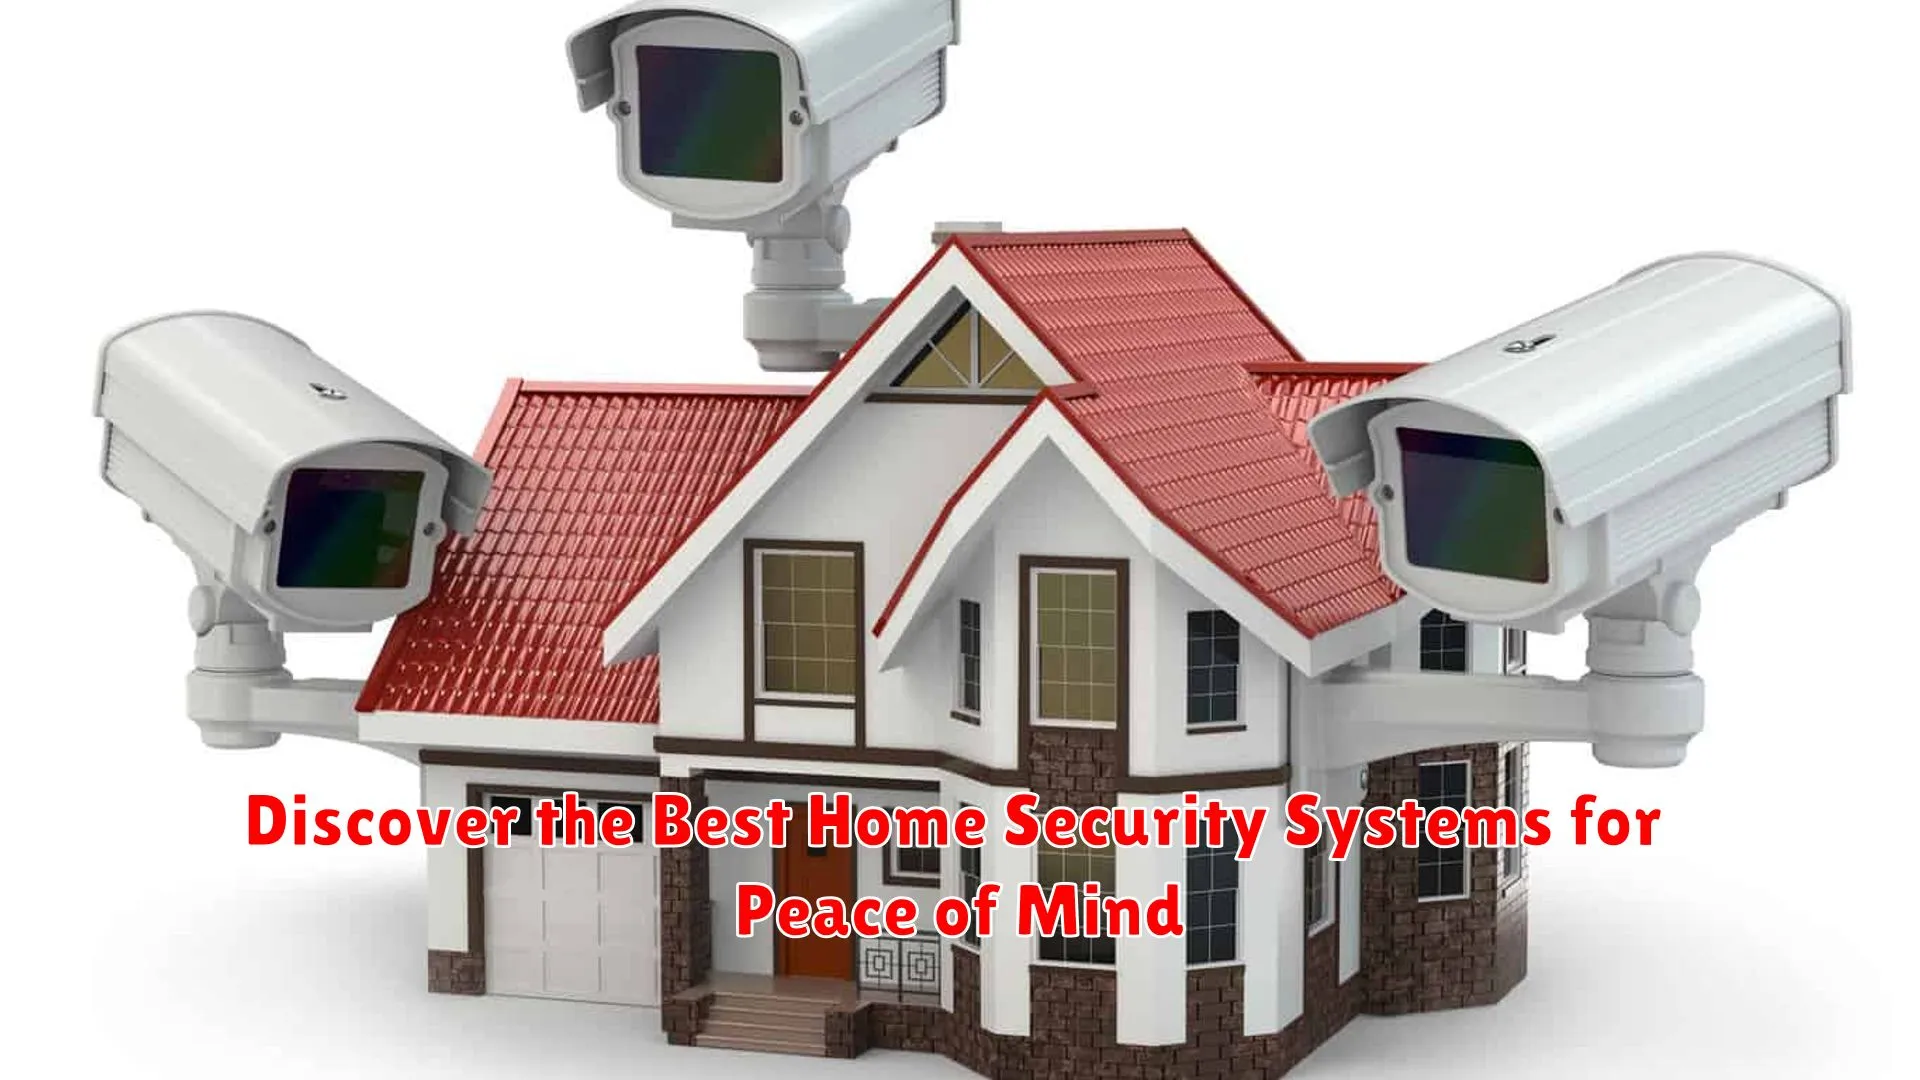 Discover the Best Home Security Systems for Peace of Mind